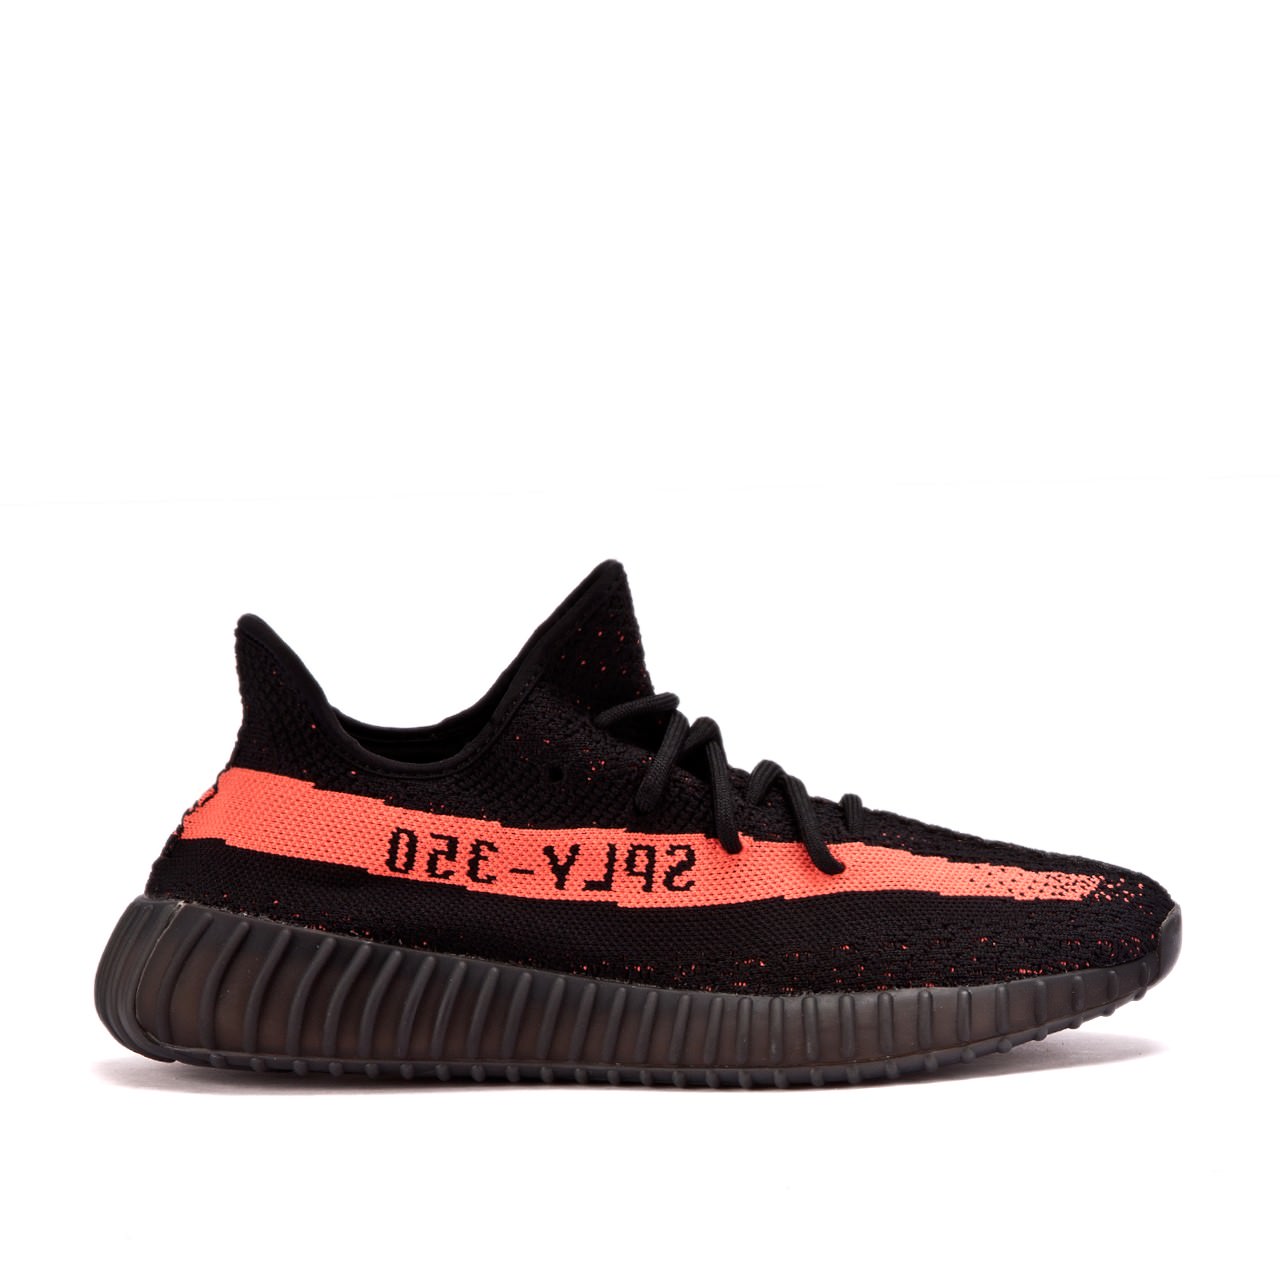 yeezy boost v2 core black red